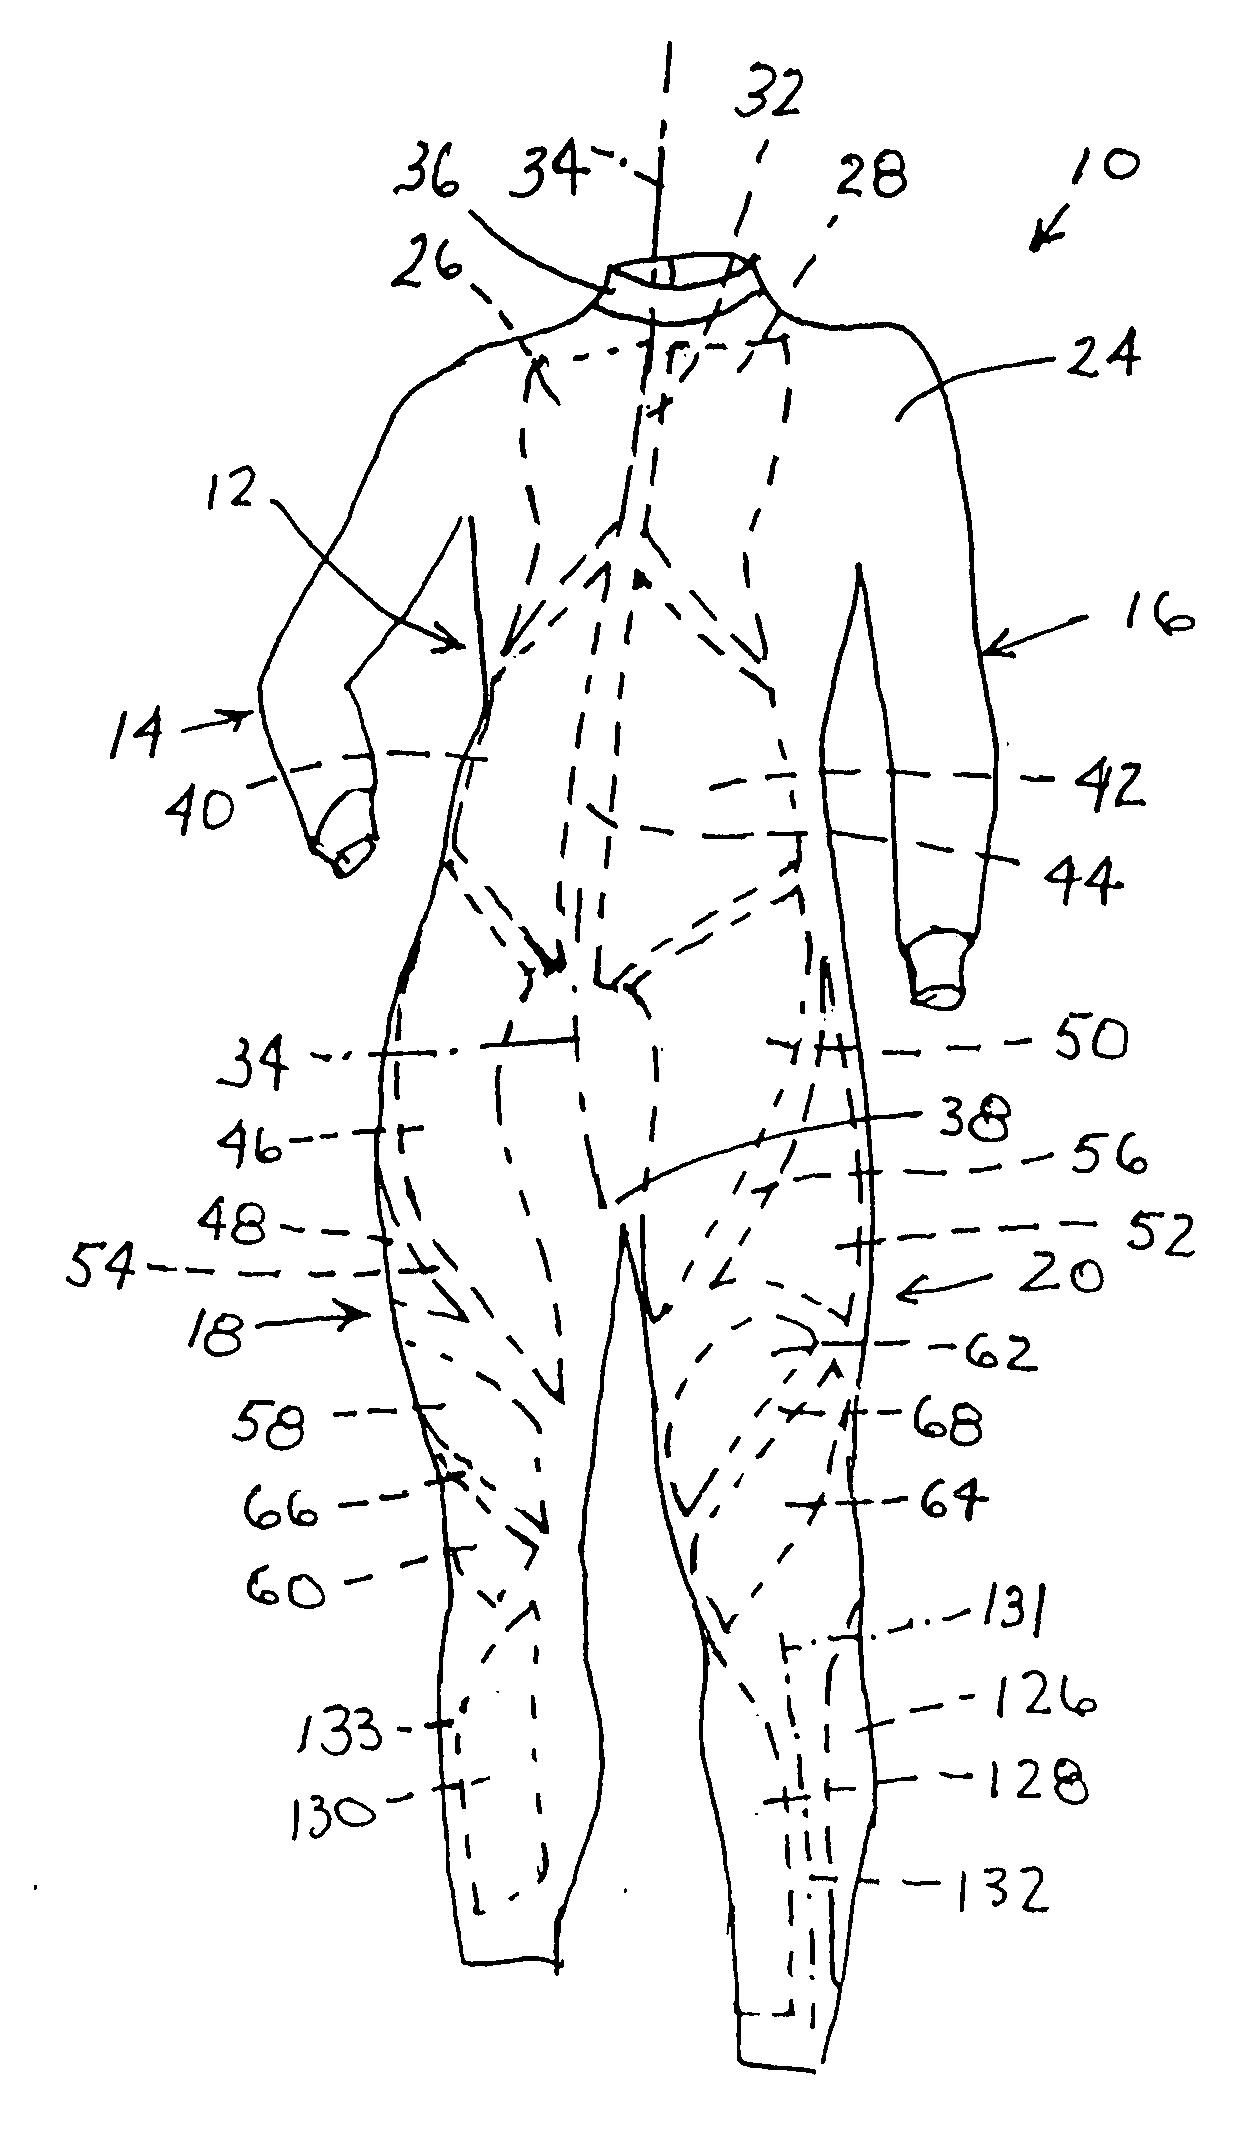 Wetsuit and associated method of manufacture